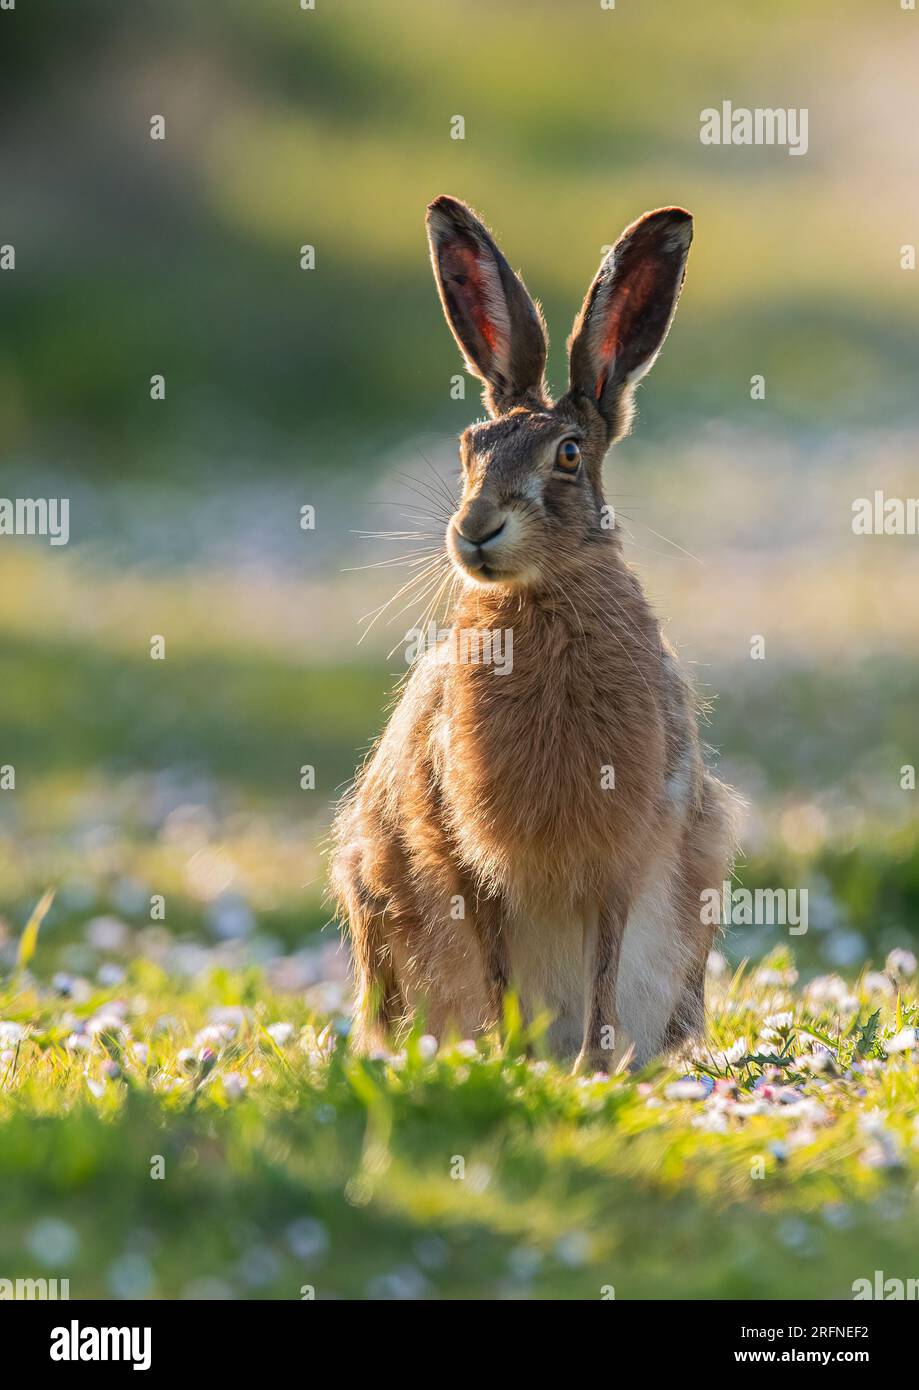 A big, strong  Brown Hare (Lepus europaeus) sitting in a carpet of   daisies. Showing  its long fur and piercing orange eye. Suffolk, UK. Stock Photo